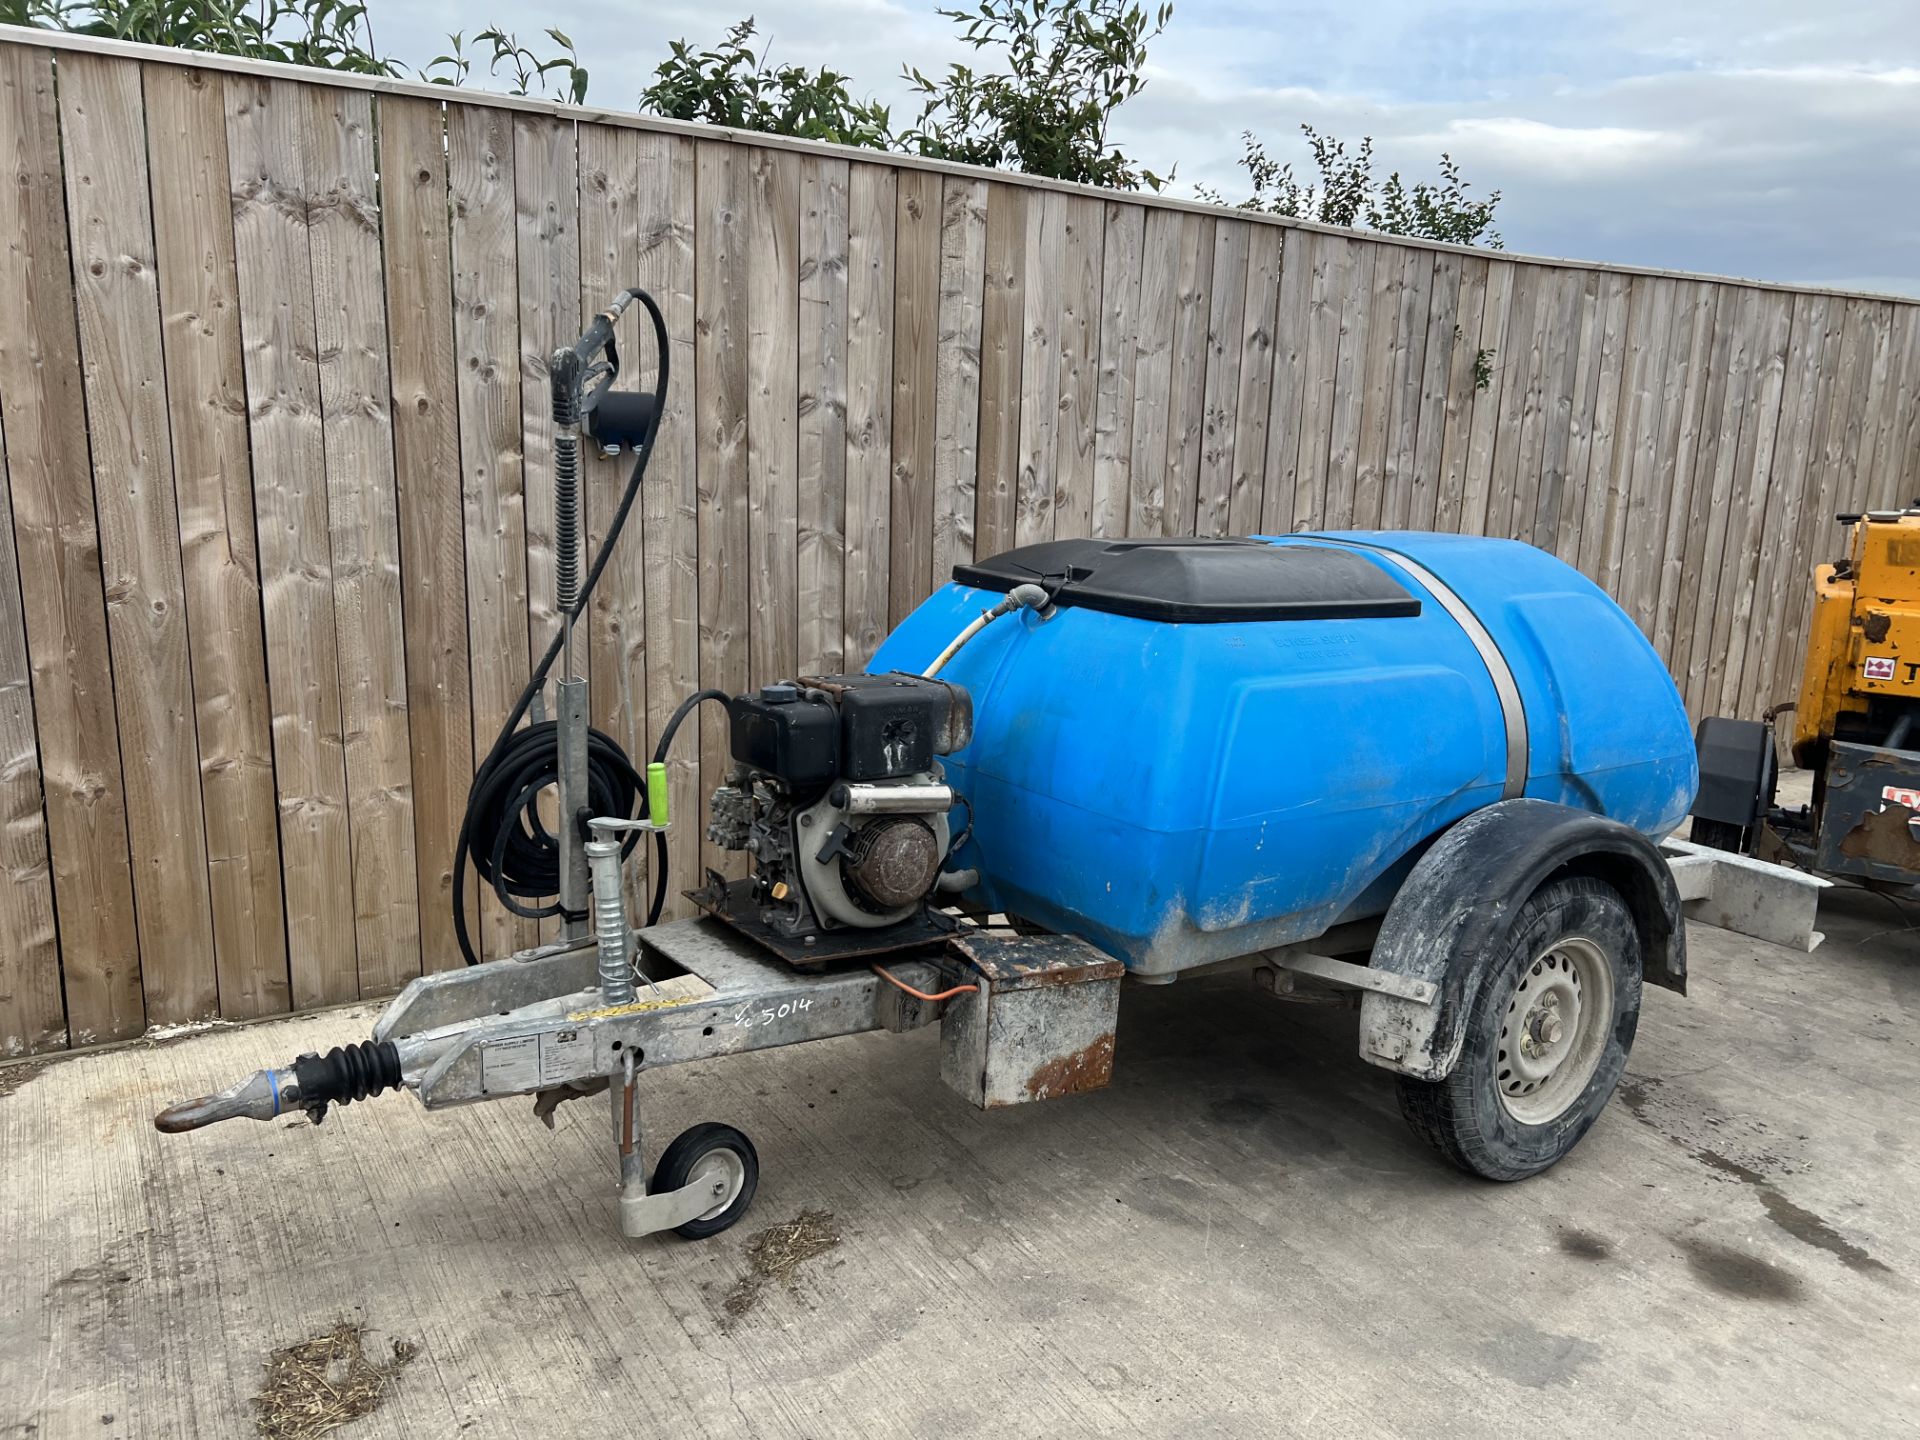 TOWABLE DIESEL PRESSURE WASHER BOWSER